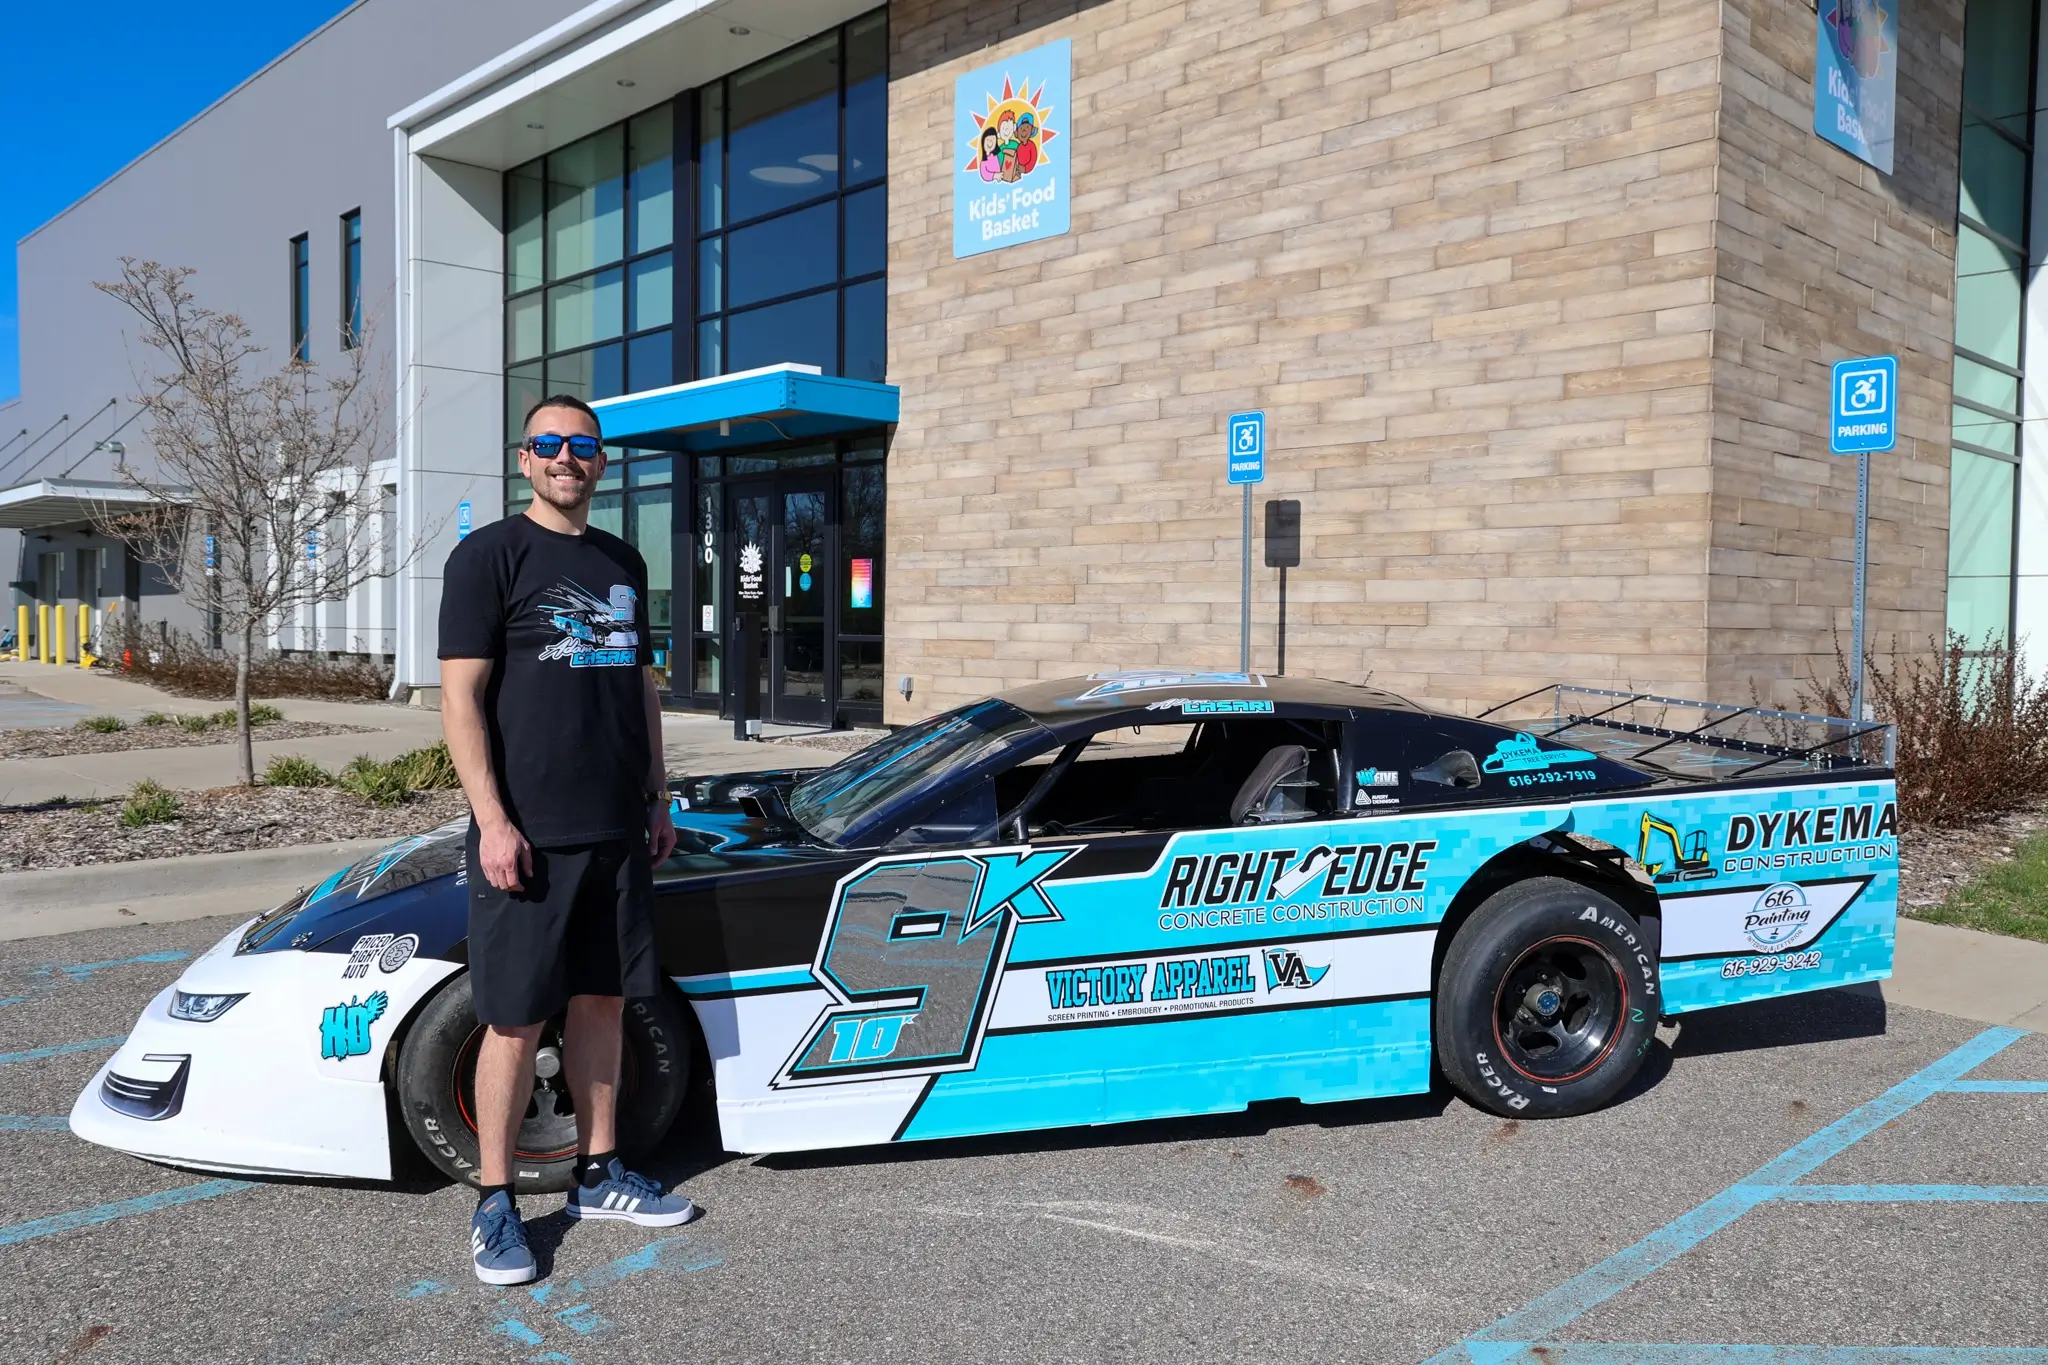 Race car driver wearing all black stands in front of blue, black and silver race car parked in front of large brick building with Kids' Food Basket logo.